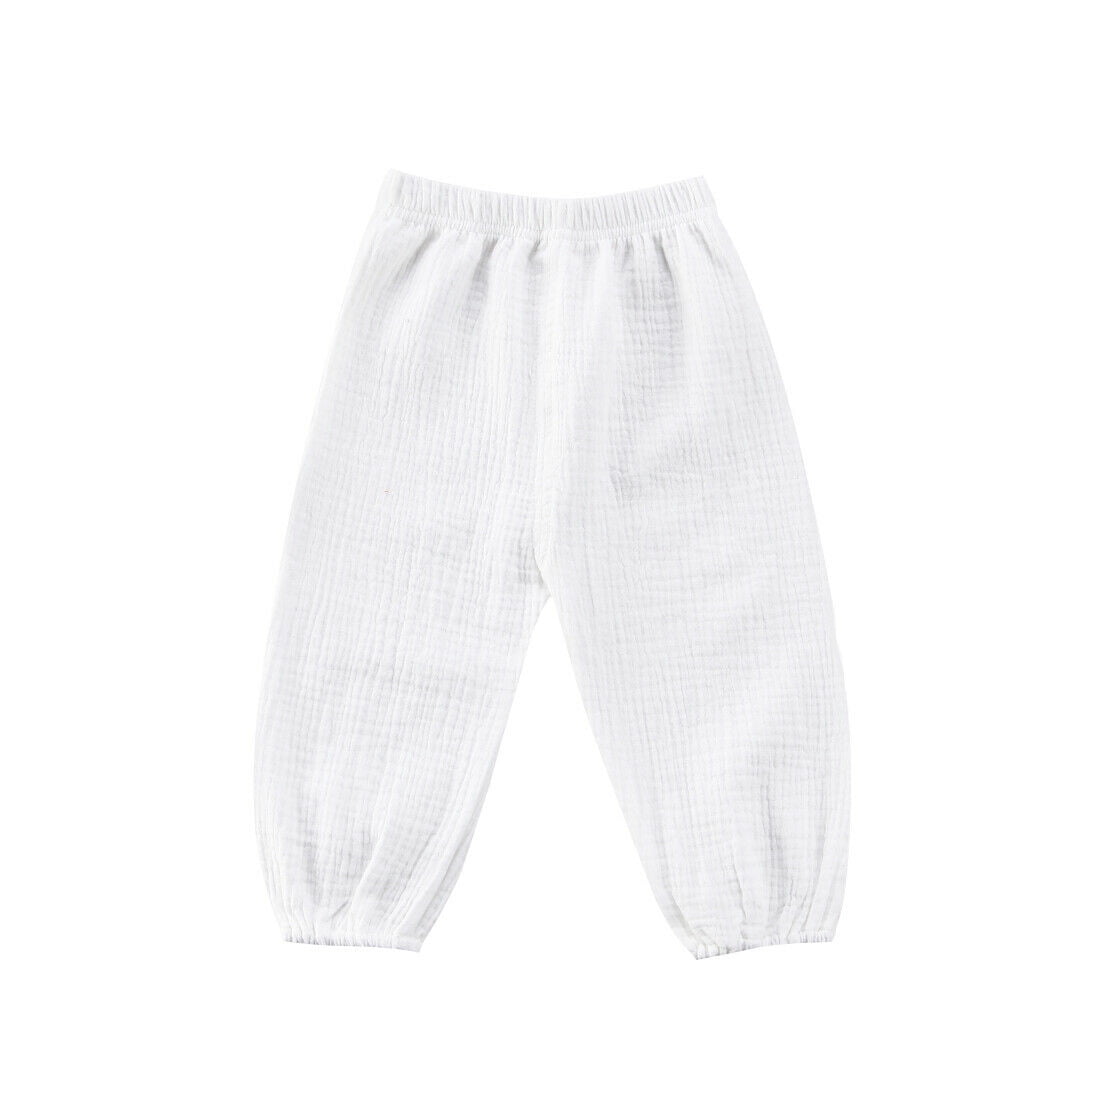 Harem Pants For Kids,Zerototens Children Girls Boys Solid Linen Pleated Kids Pants Kids Baggy Dance Costume Bloomers Trousers Ankle-Length Yoga Pants Casual Outfit 1-7 Years Old 